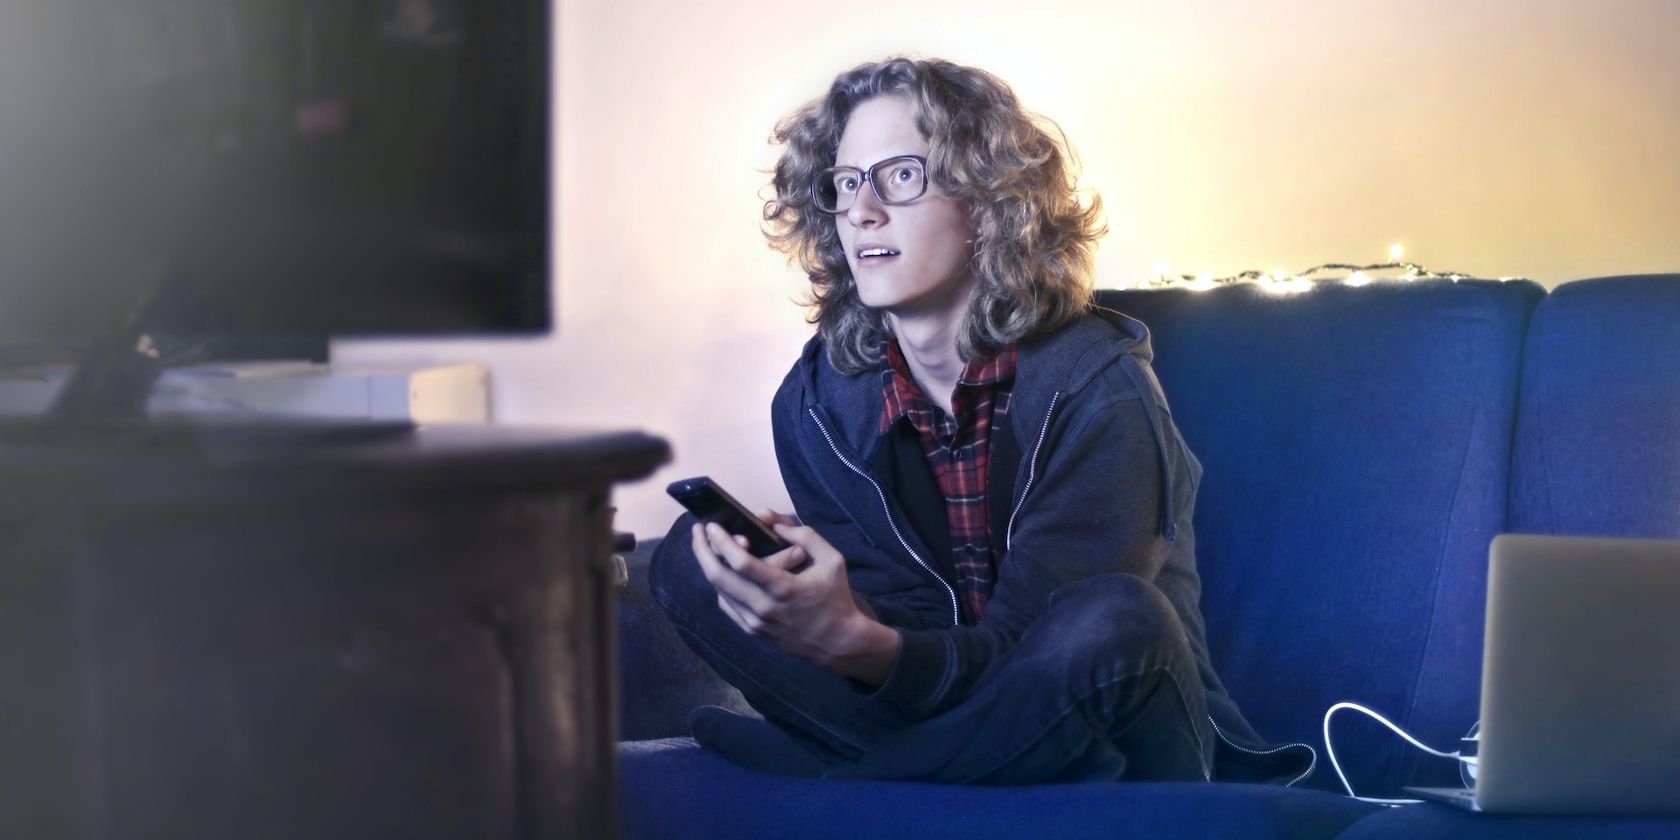 A young man watching TV and sitting beside a MacBook